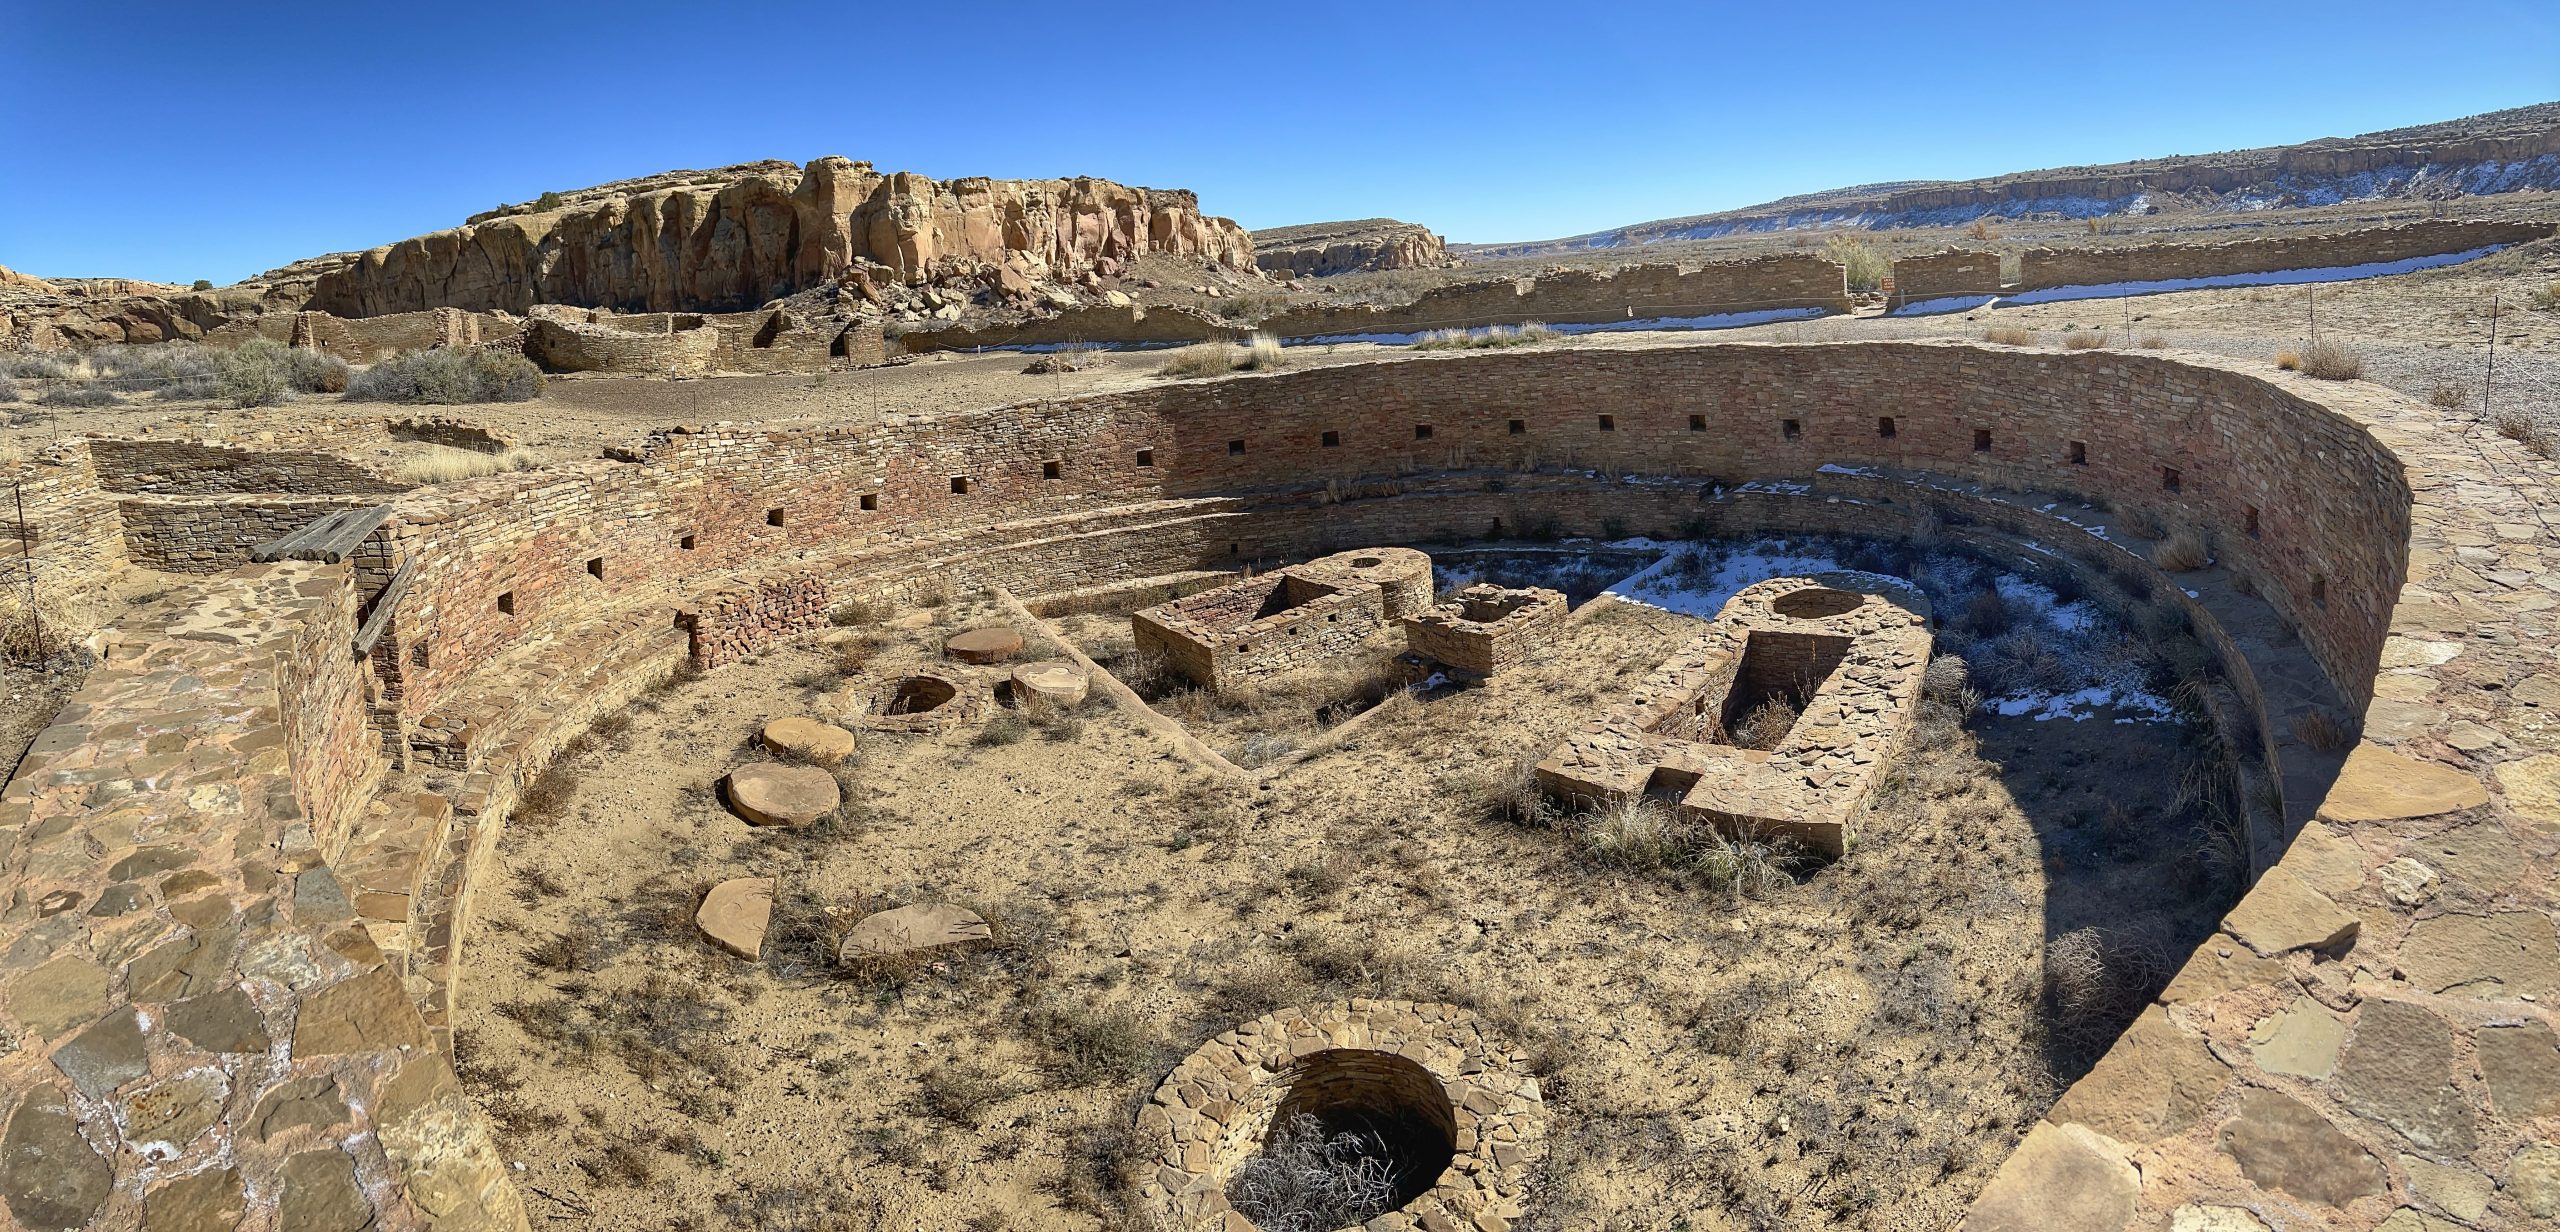 New Mexicans Urge Biden Administration to Protect Lands Surrounding Chaco Canyon From Oil and Gas Drilling Until Congress Passes Legislation to Provide Permanent Protection